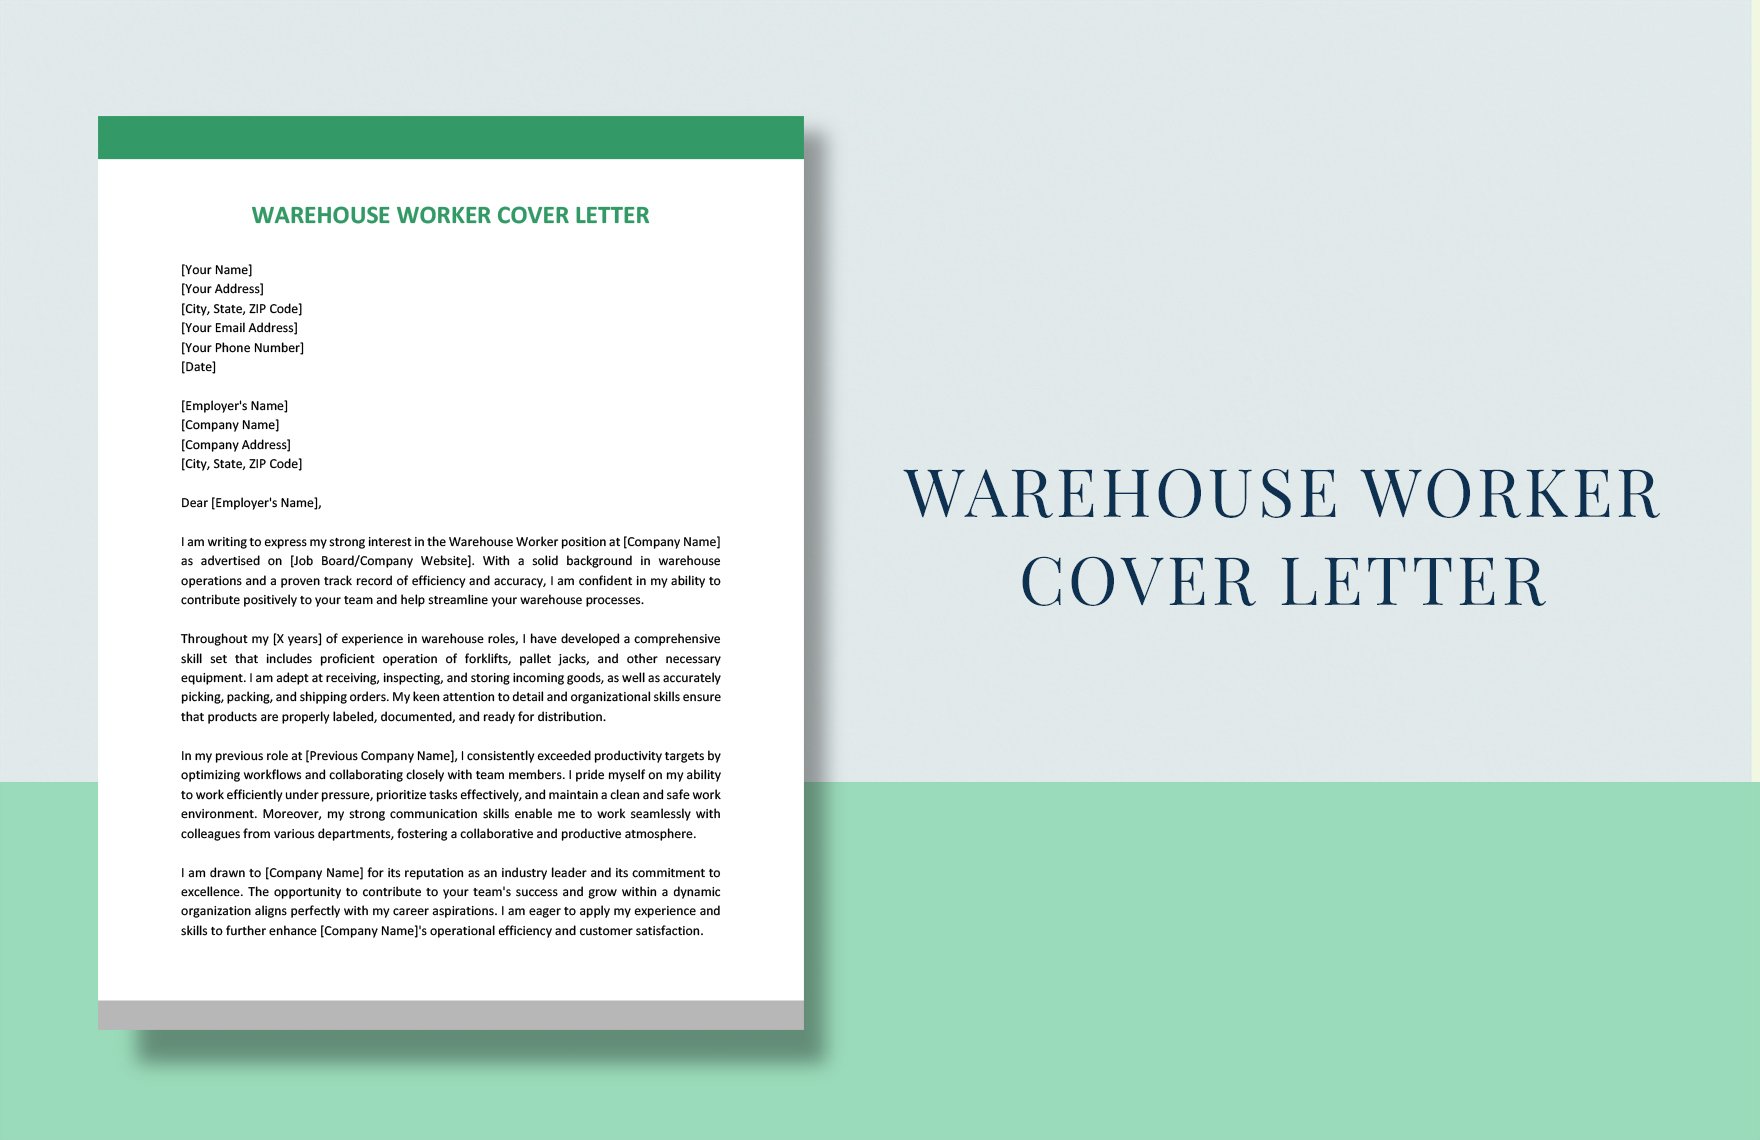 Warehouse Worker Cover Letter in Word, Google Docs, PDF